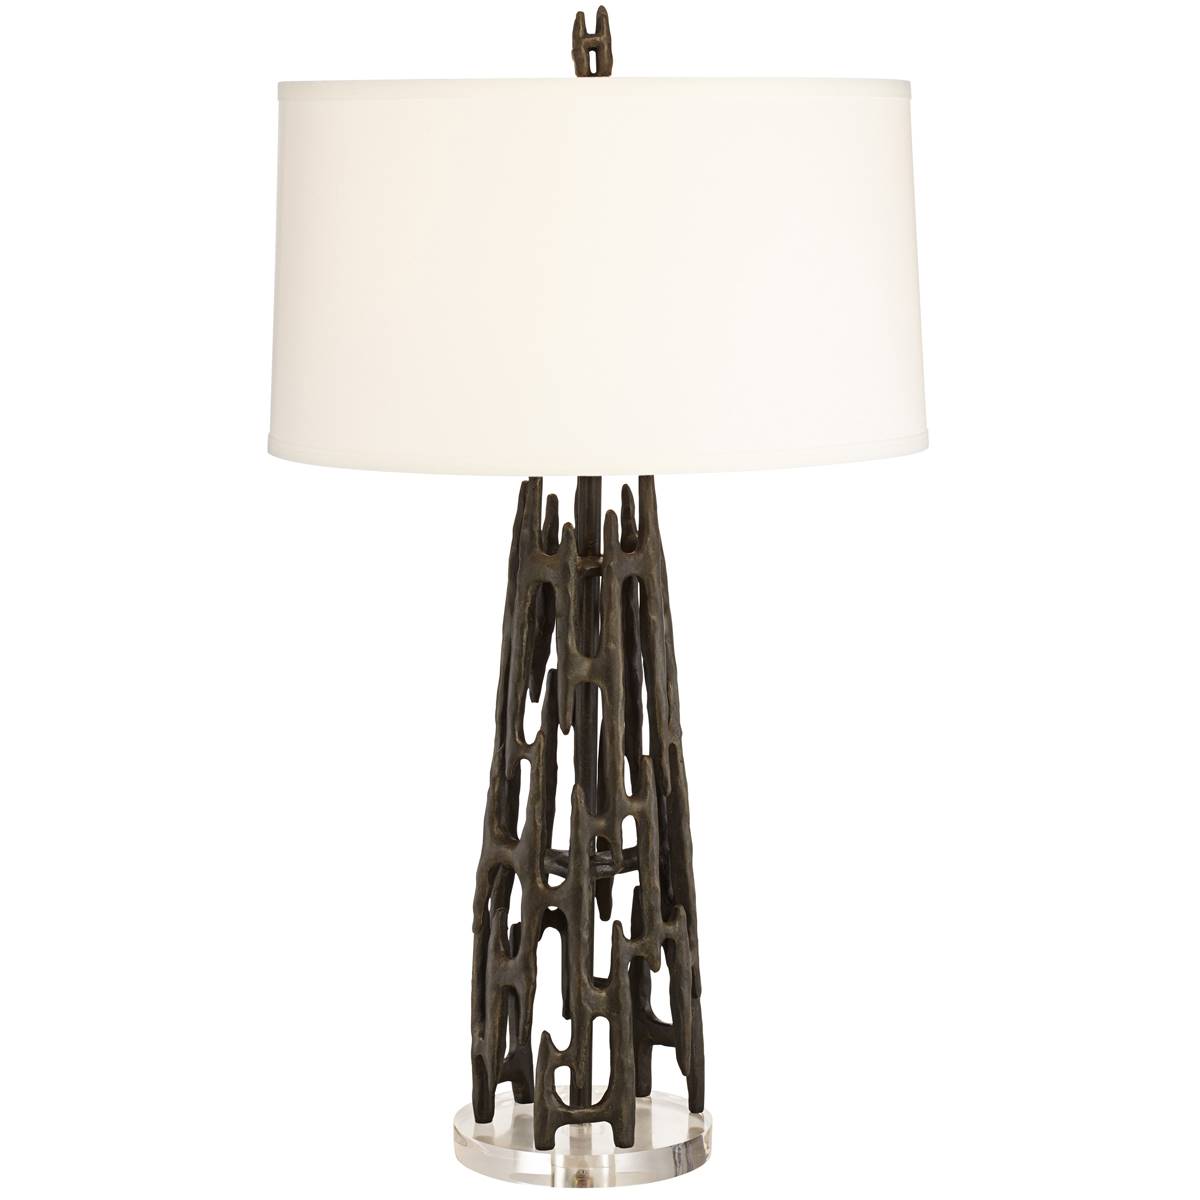 Pacific Coast Lighting Paragon 32in. Black Table Lamp